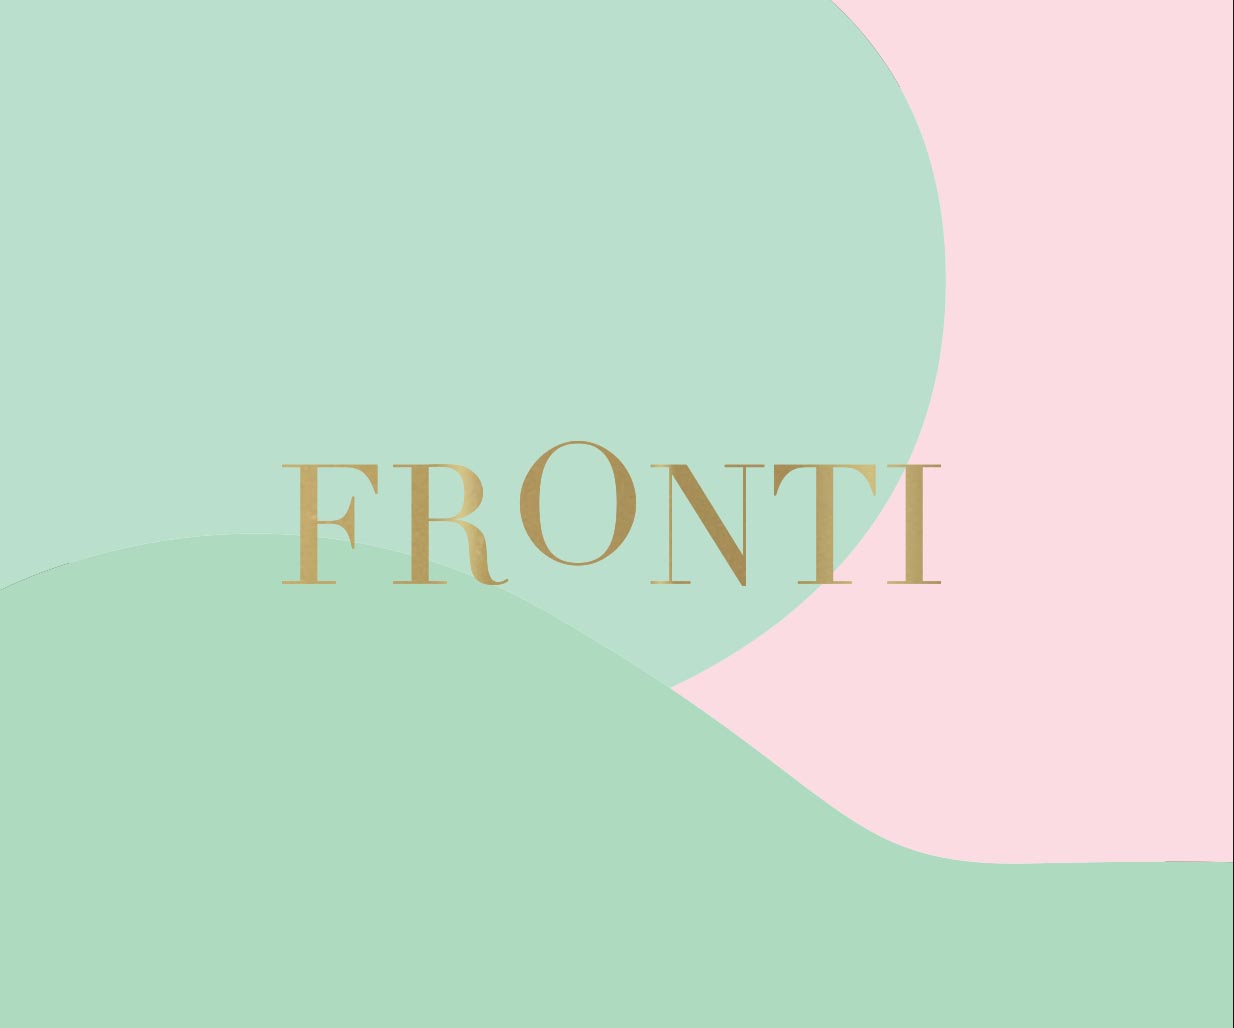 Branding Agency Percept Continue Their Partnership With Edenvale With Wine Packaging Design for their New Product Fronti Brand Design Society